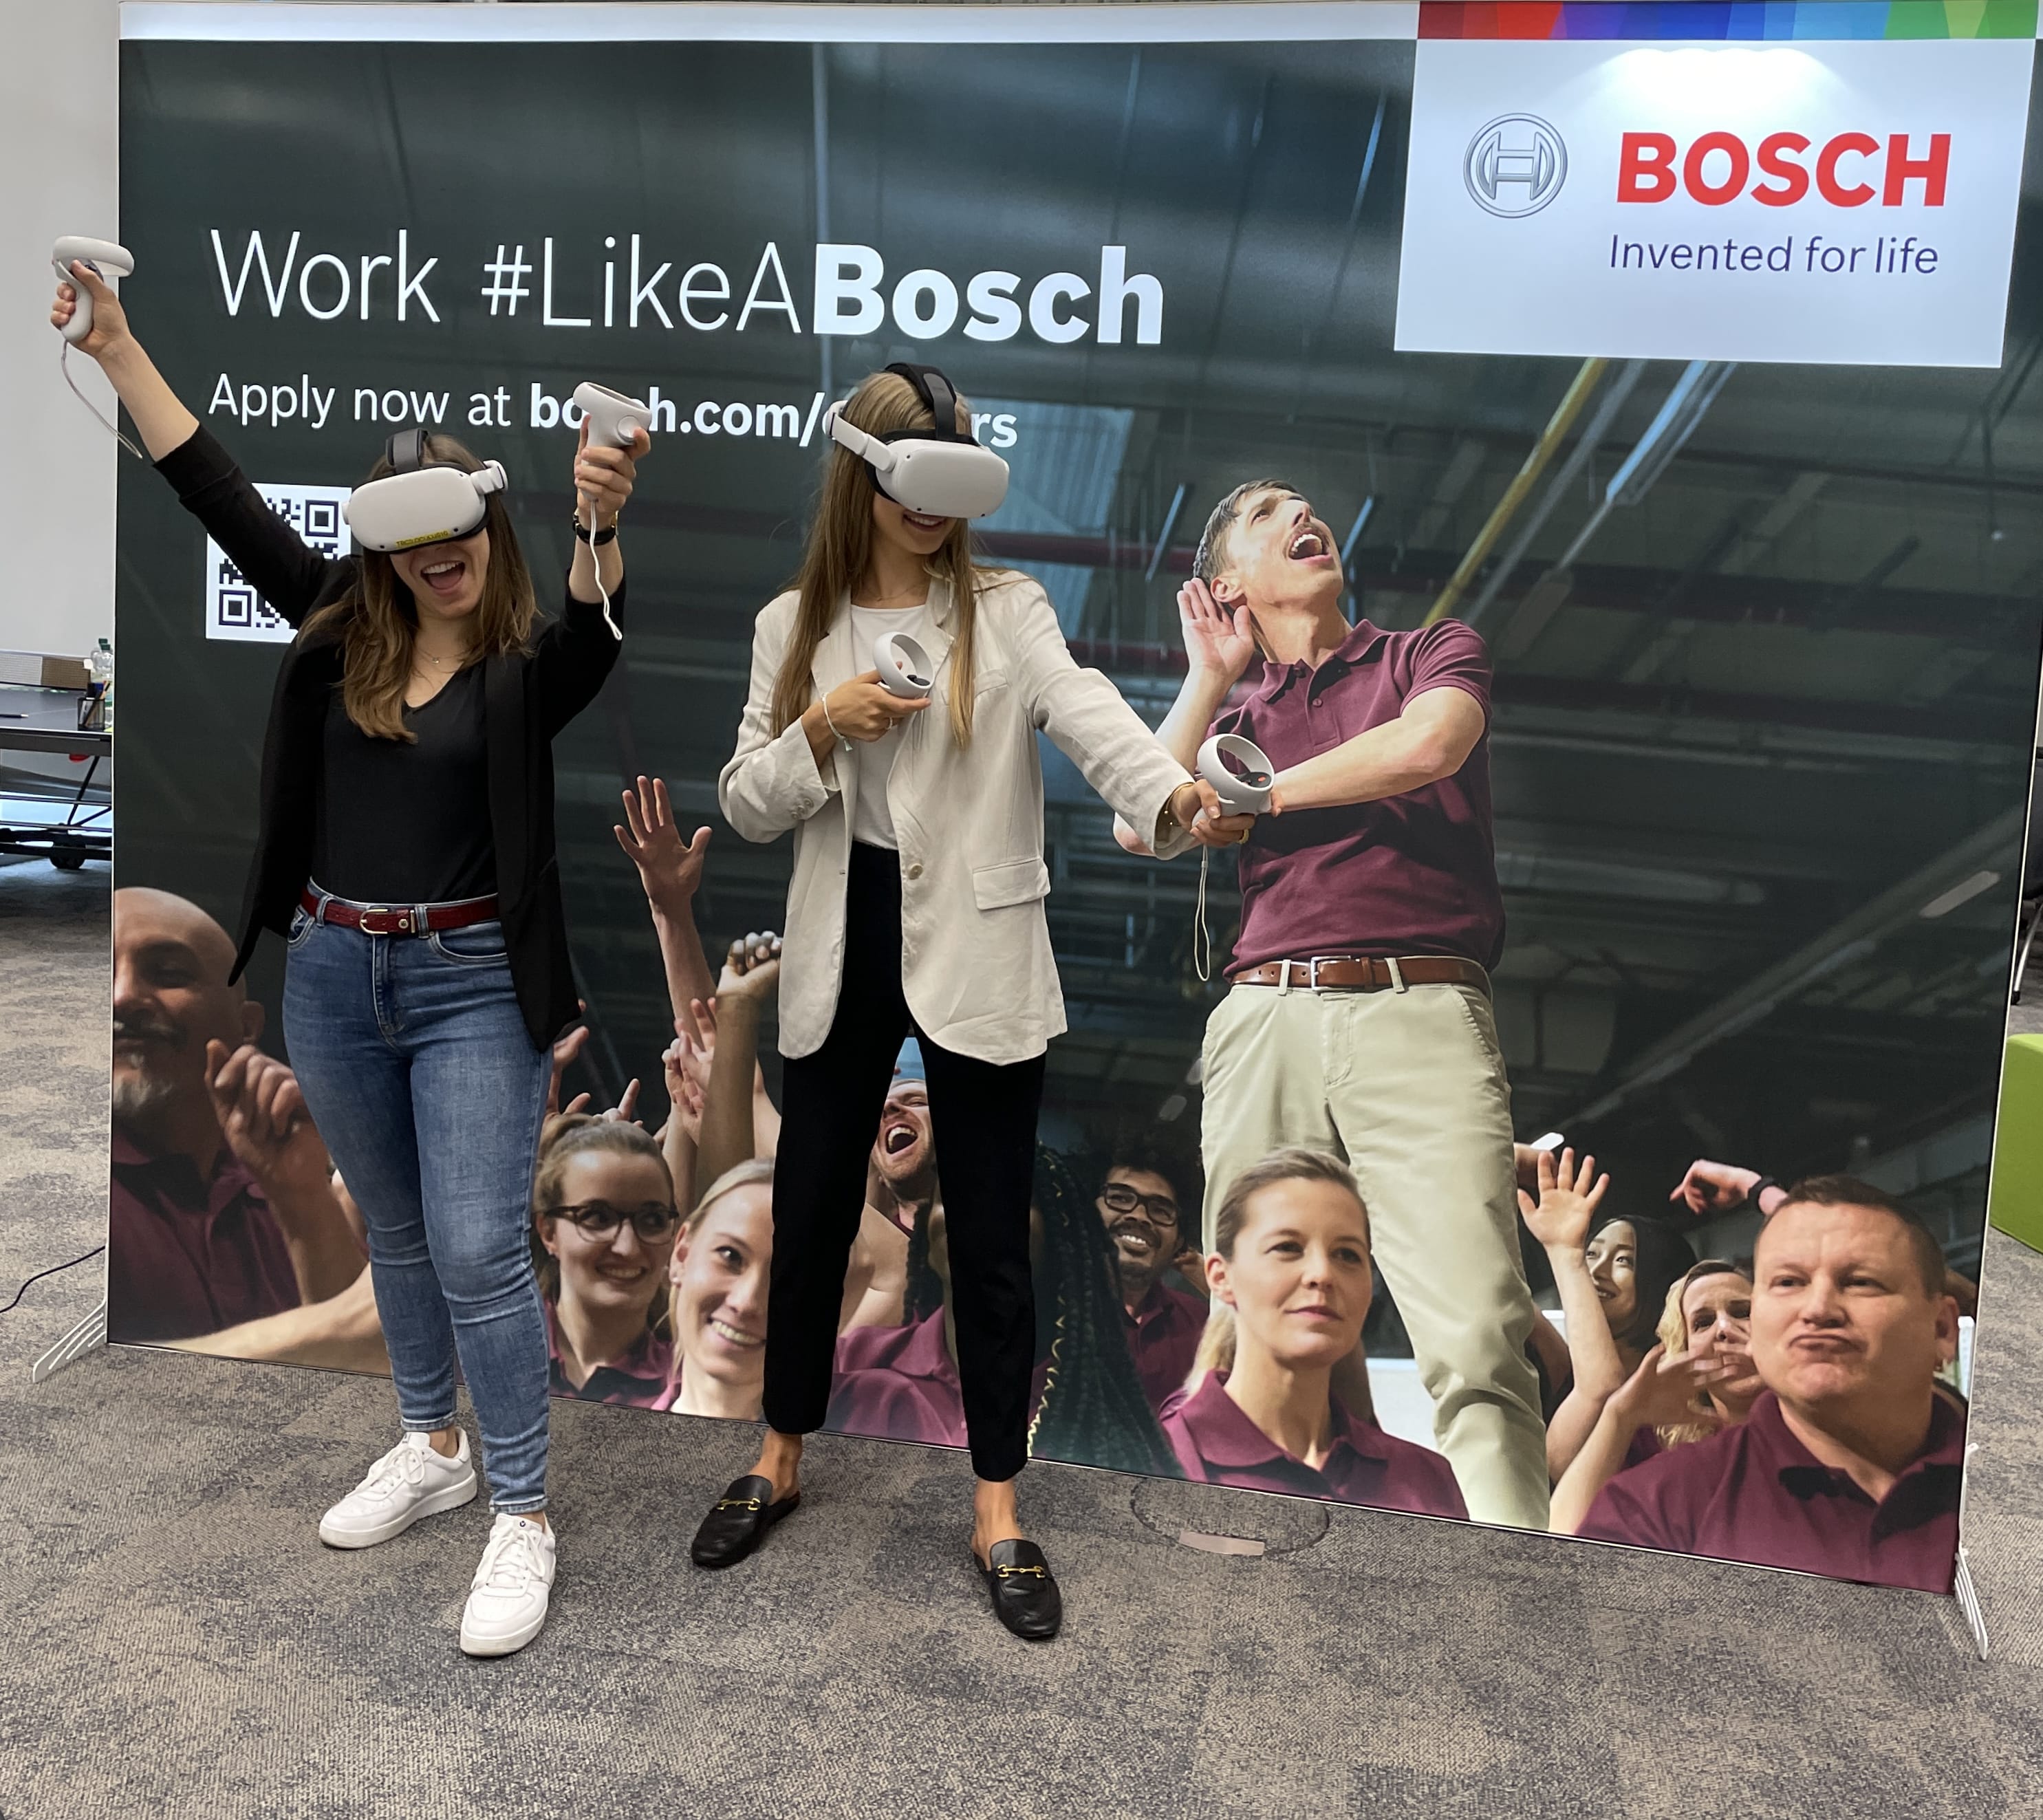 two women with VR glasses in front of work #LikeABosch poster